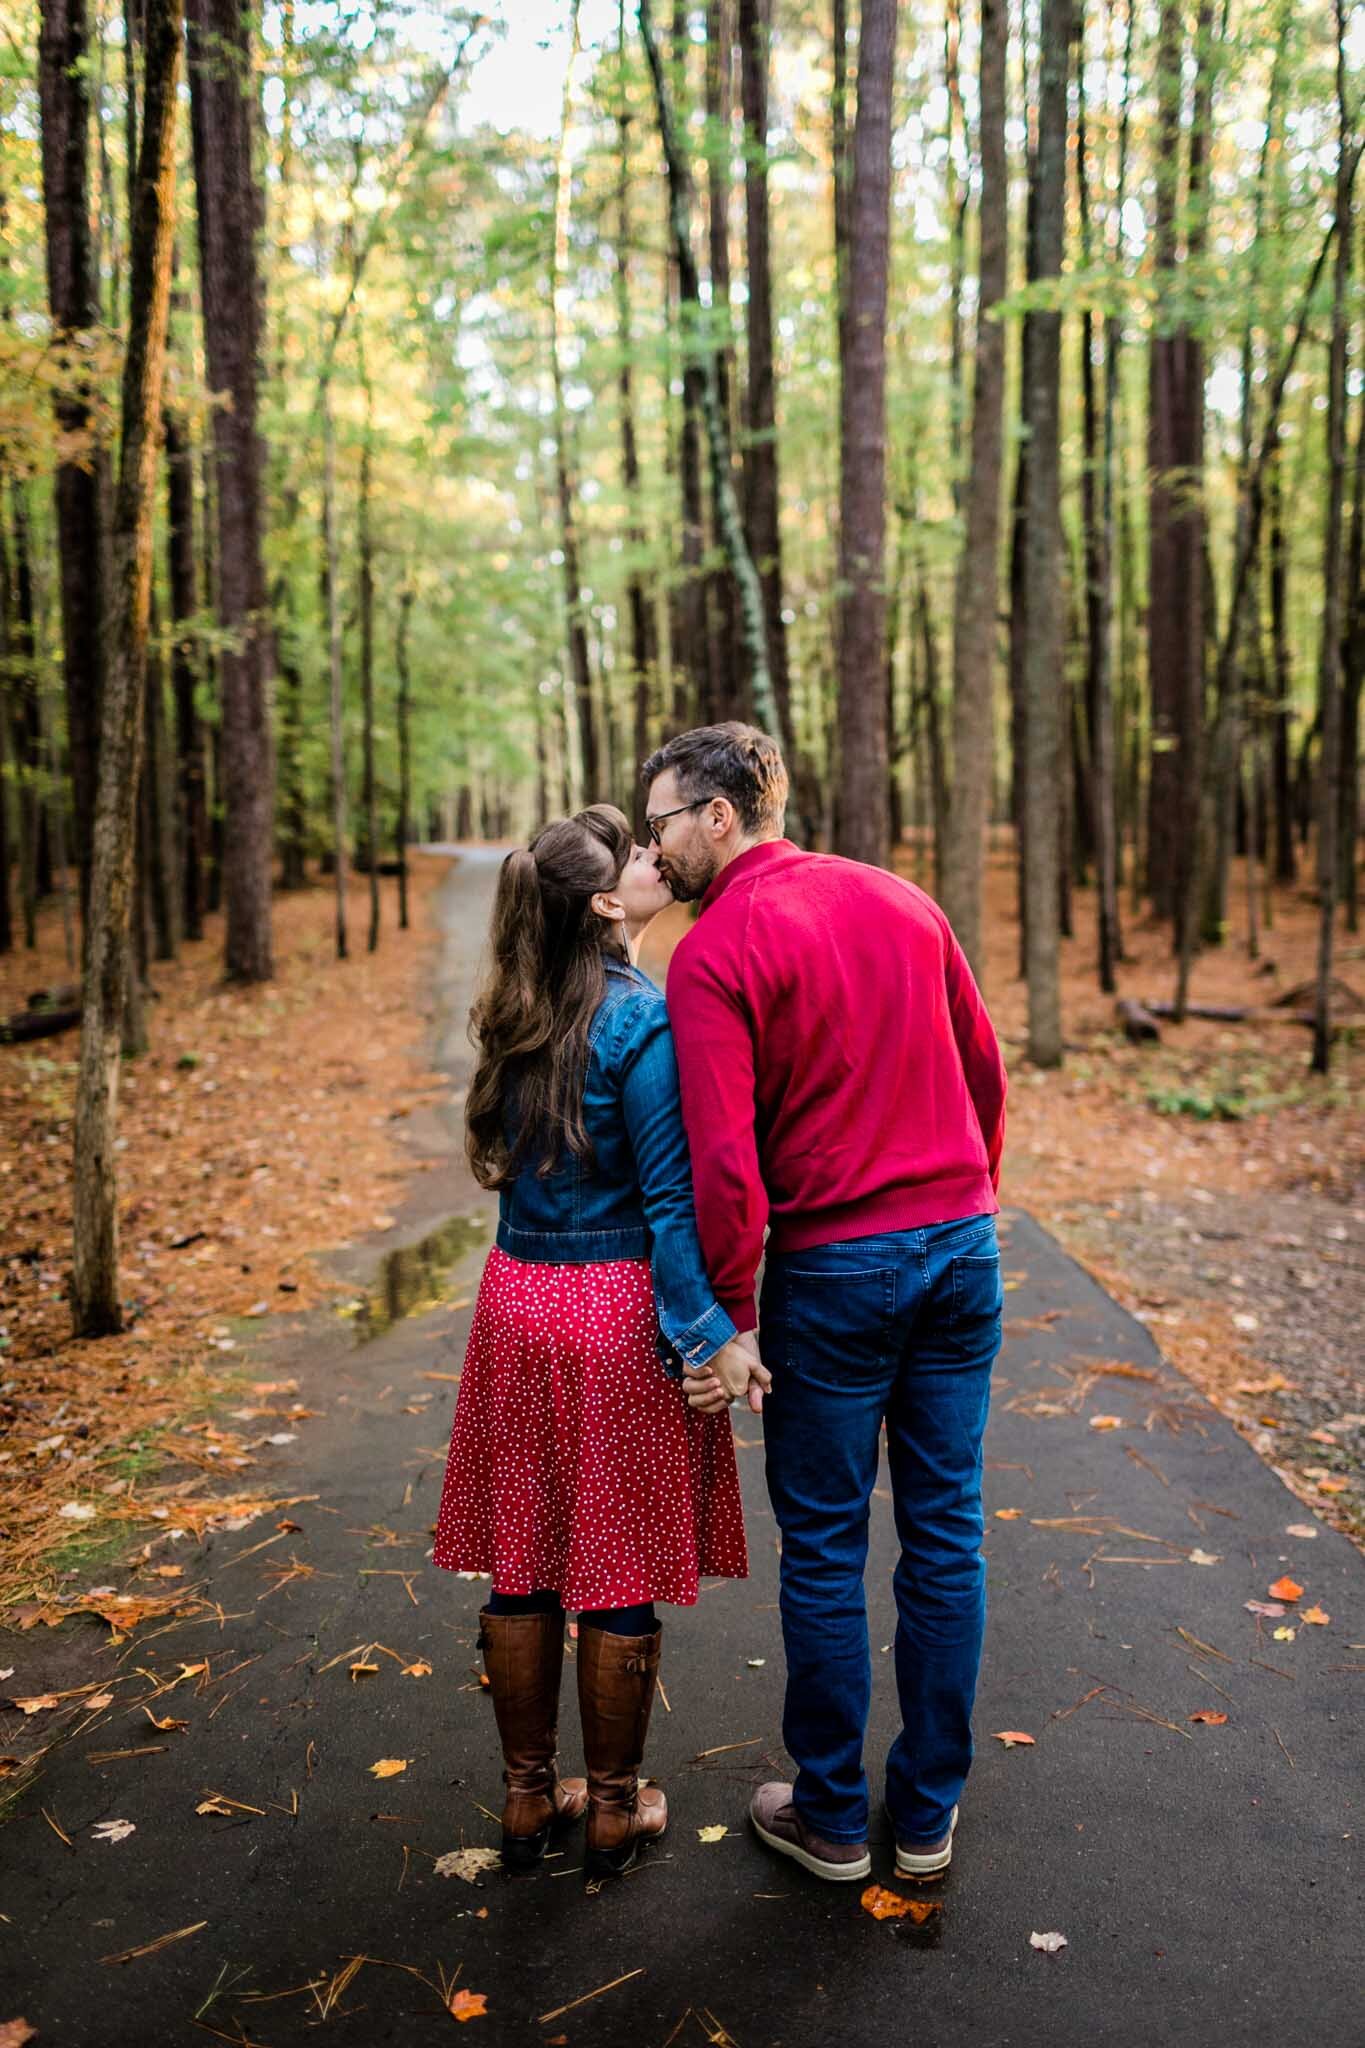 Raleigh Family Photographer | By G. Lin Photography | Umstead Park | Husband and wife kissing outdoors in forest